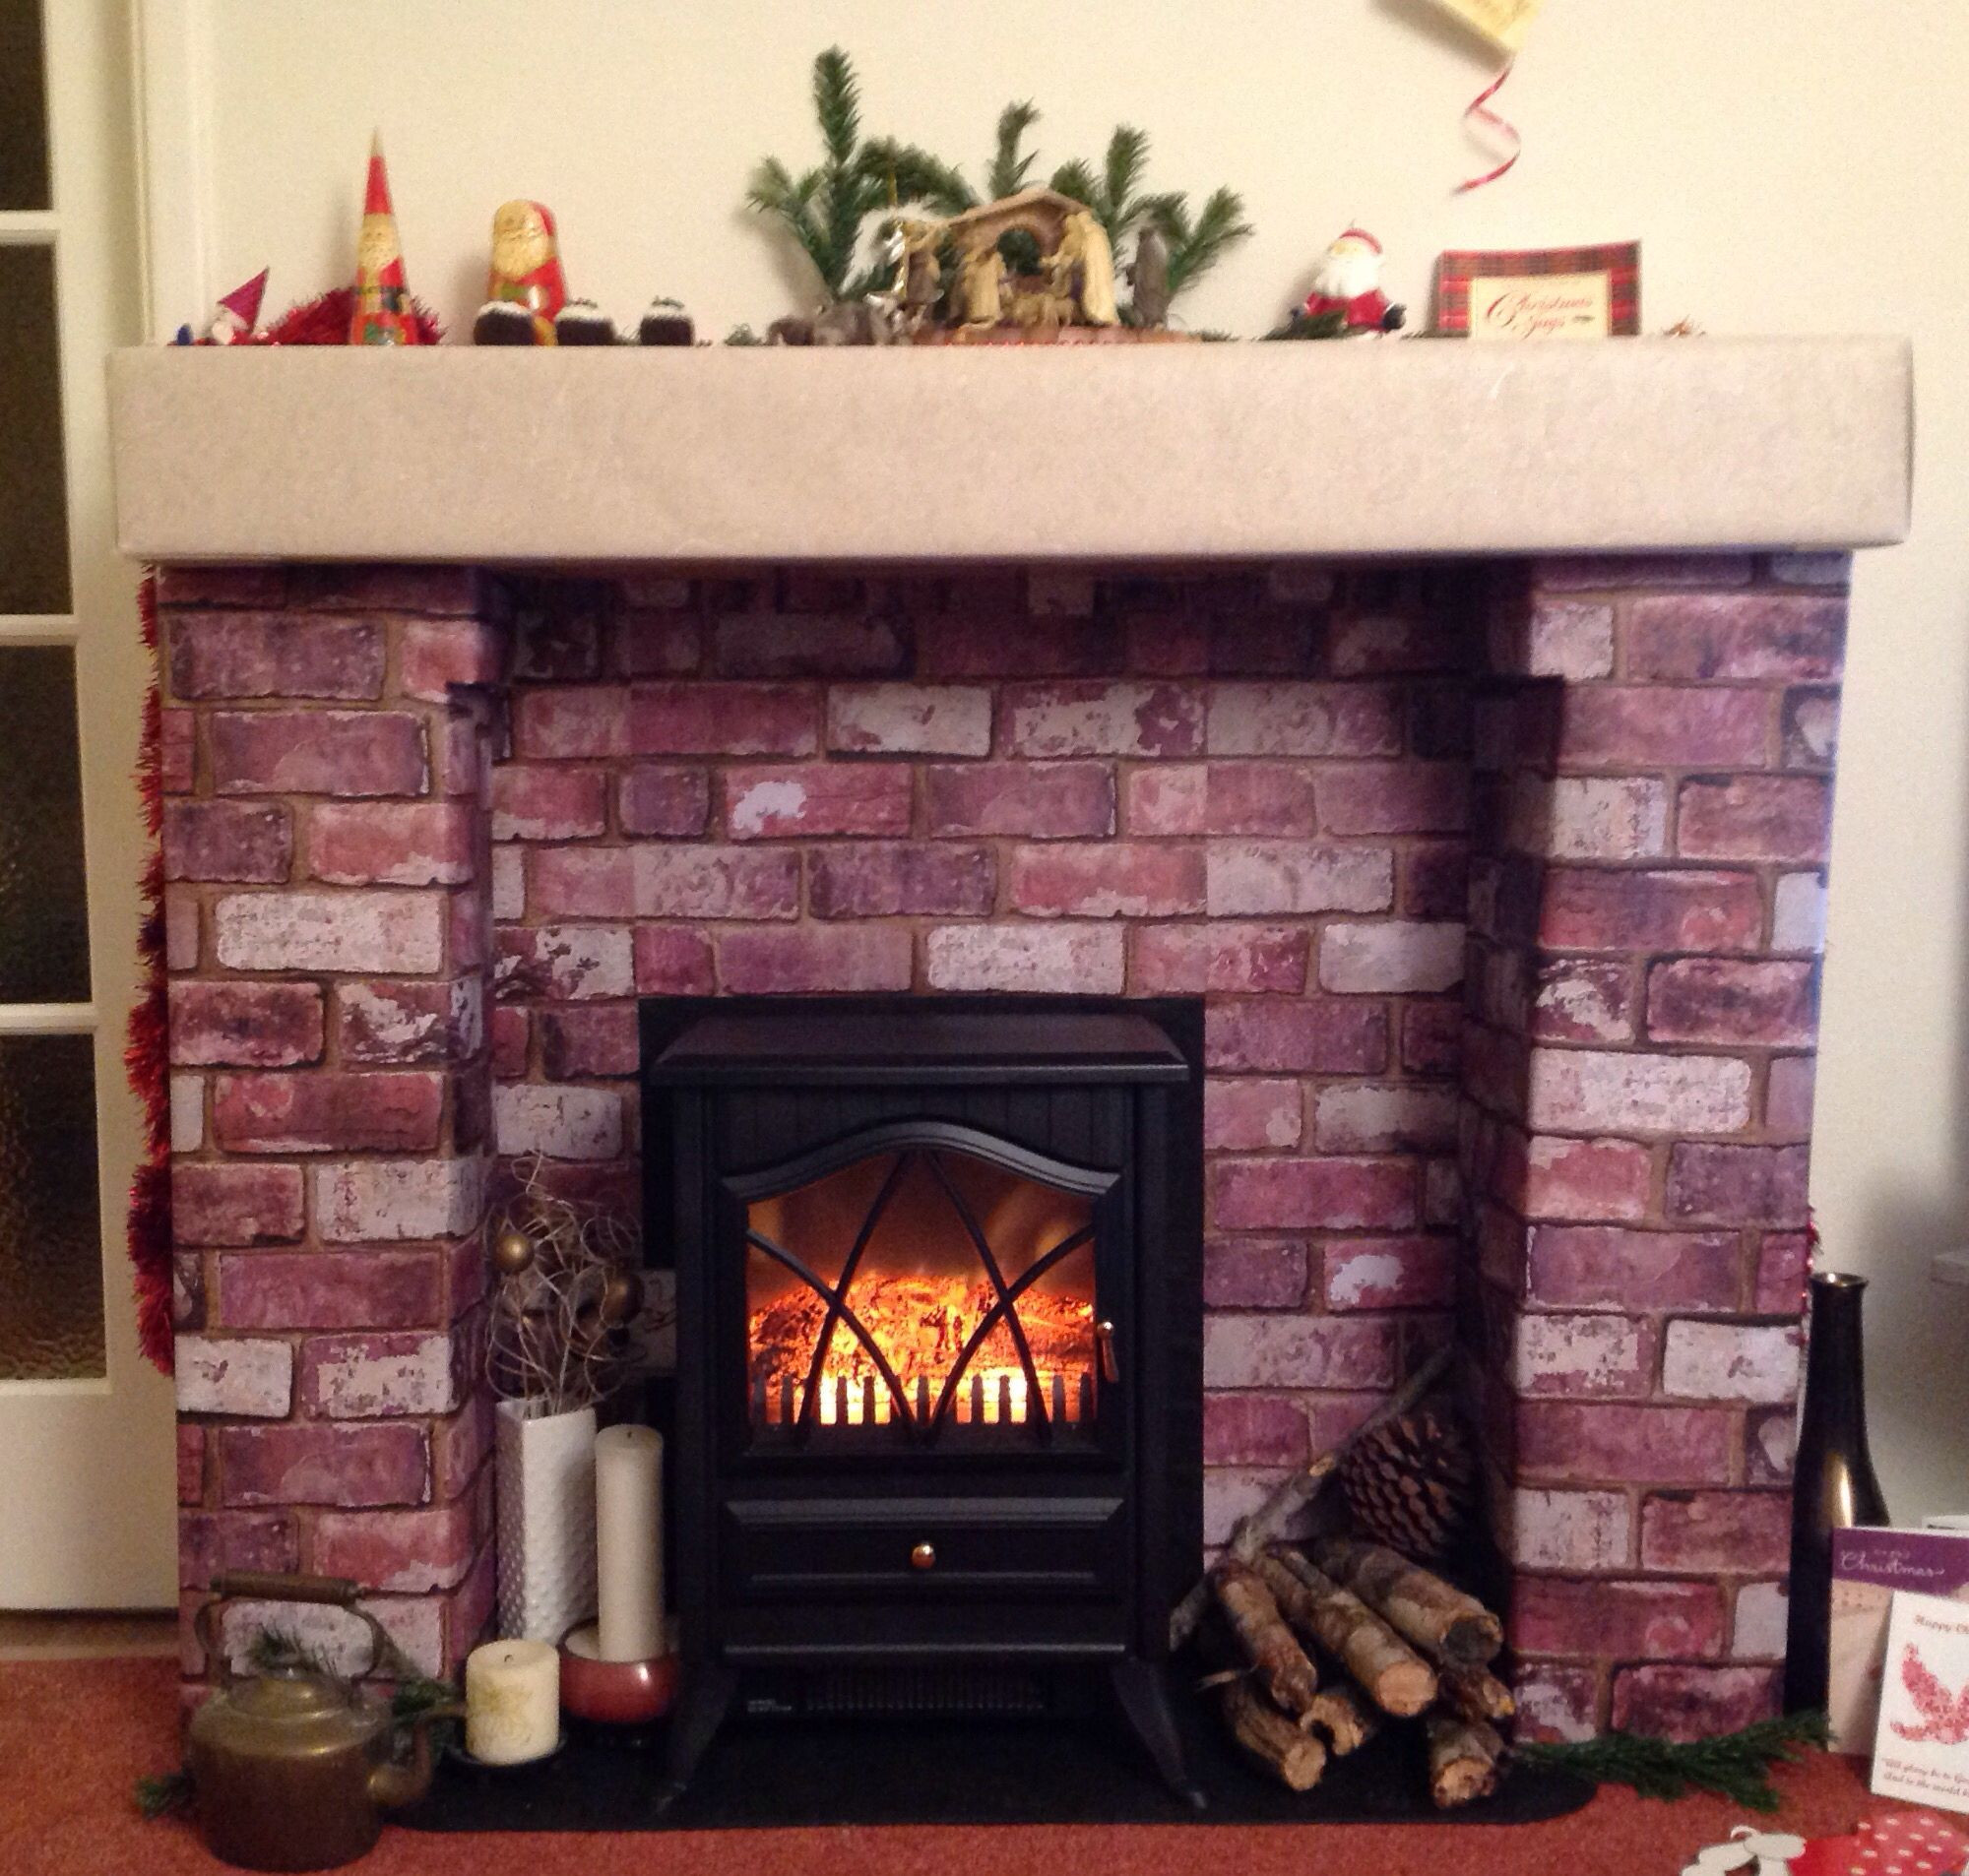 Fake Fireplace For Christmas
 Fake fireplace for Christmas made from cardboard boxes and